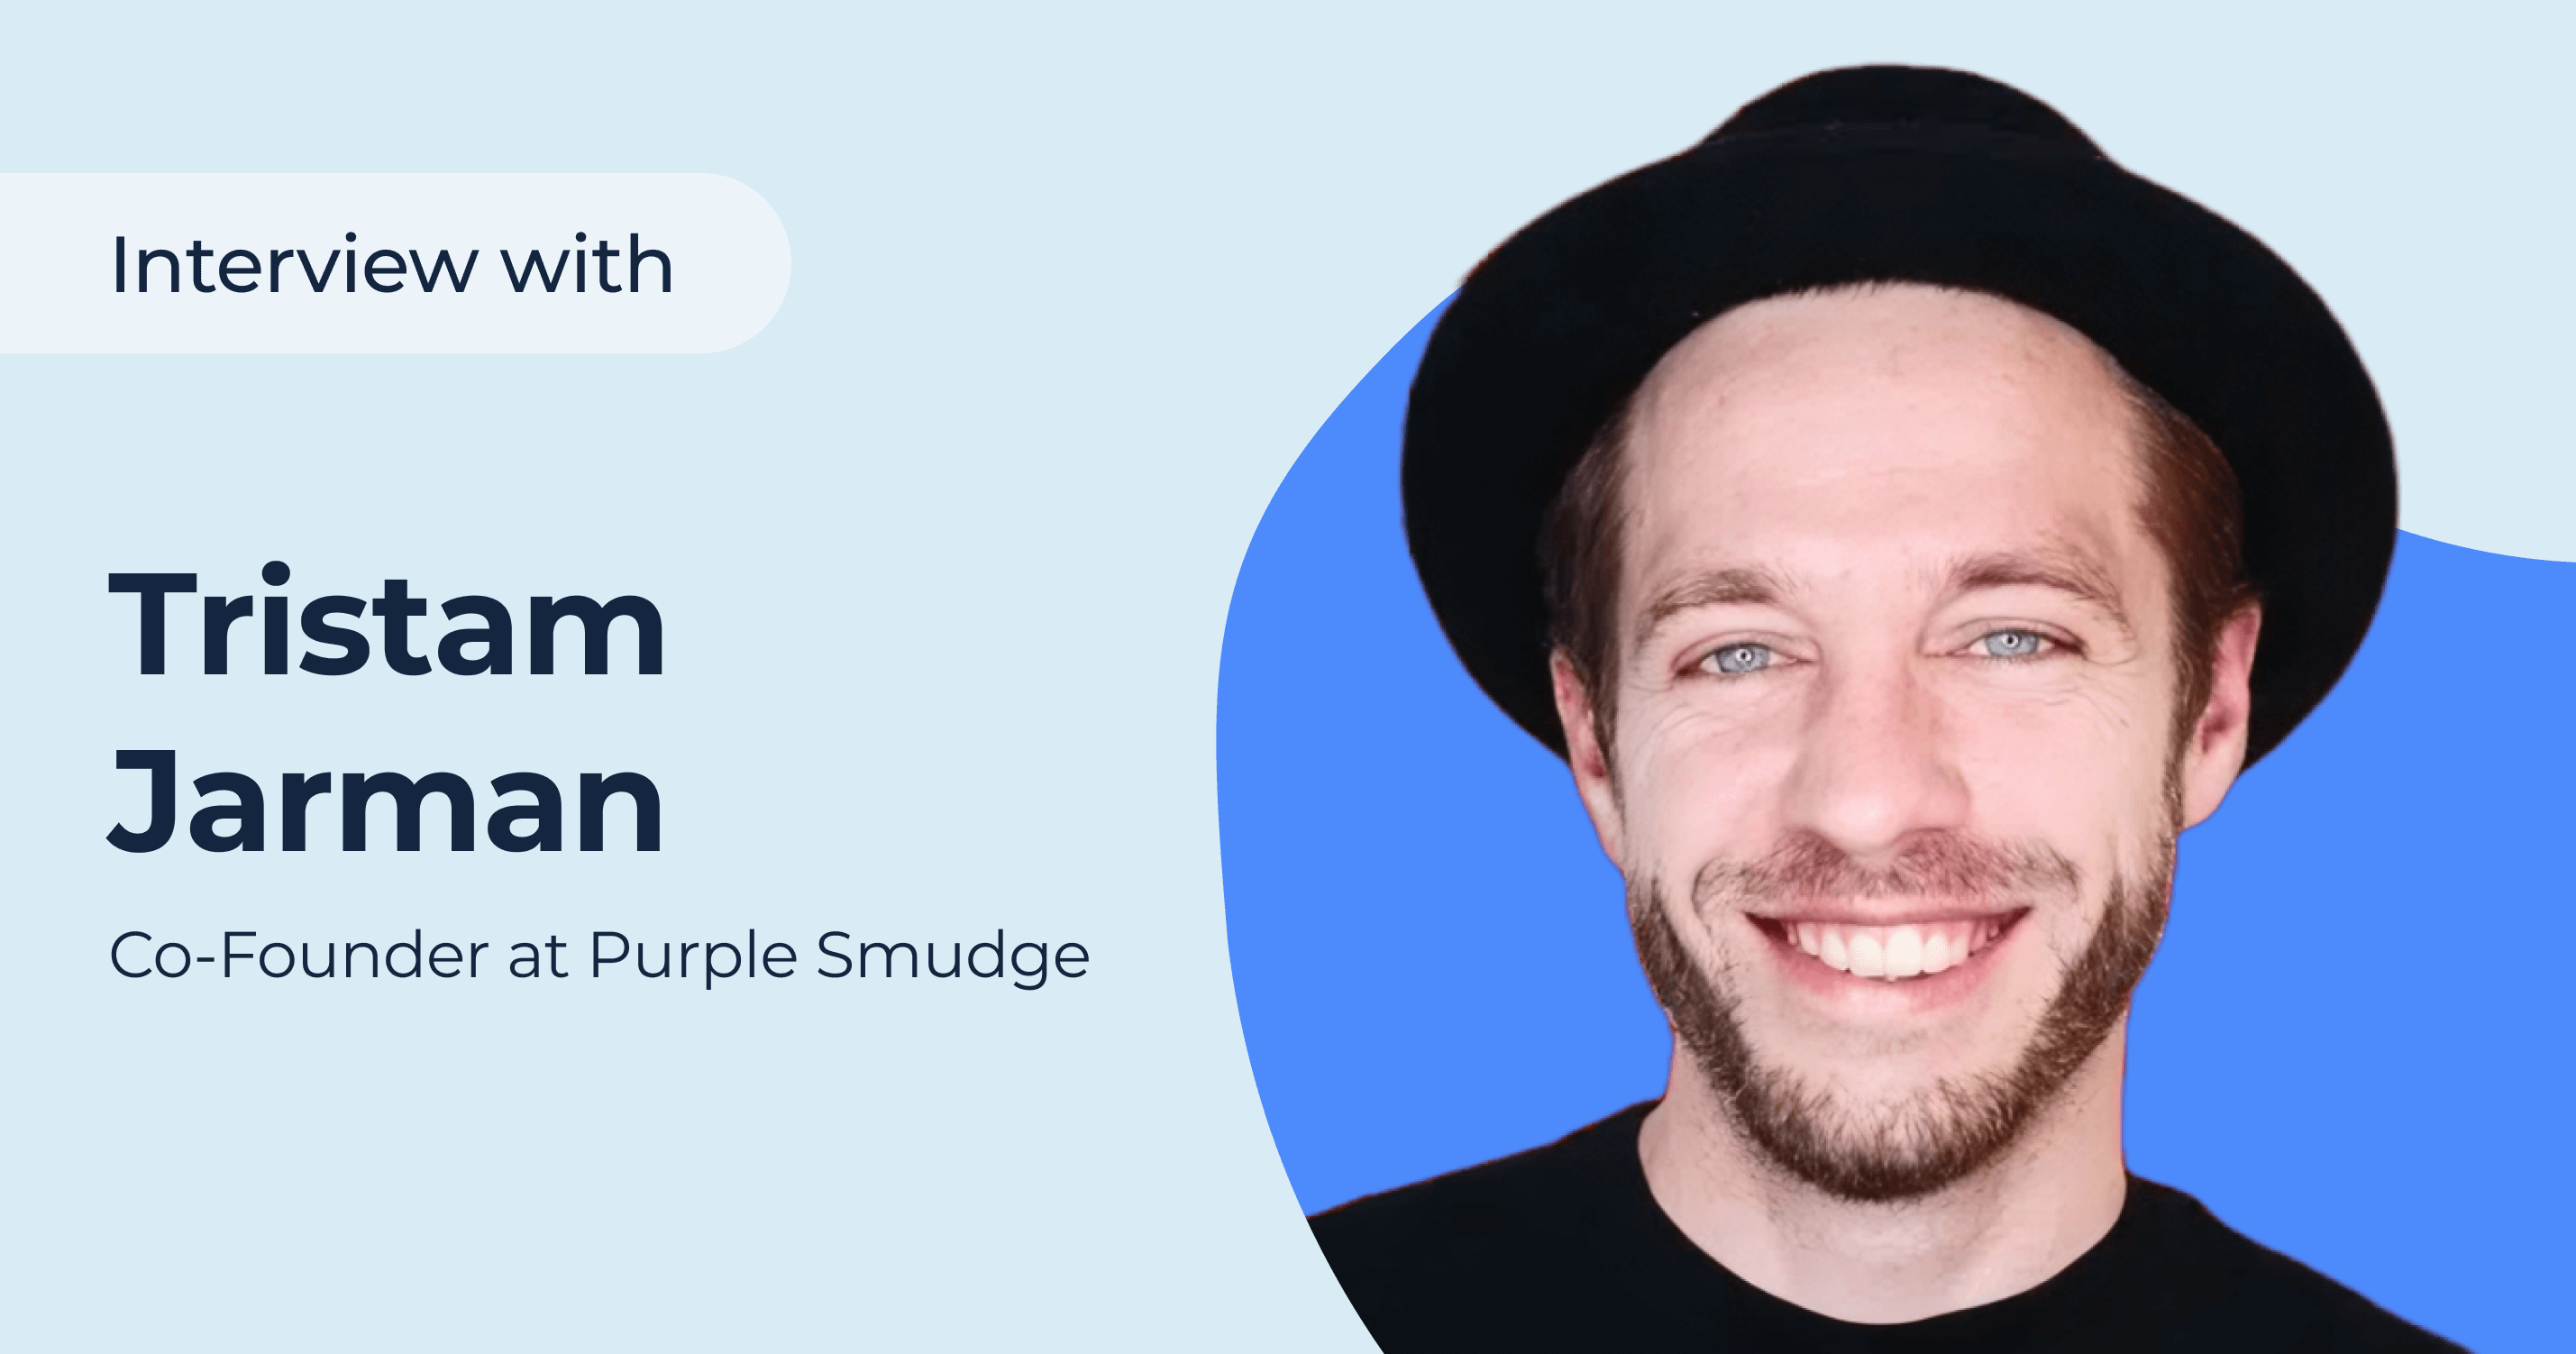 SEO tips from Tristam Jarman, Co-Founder at Purple Smudge